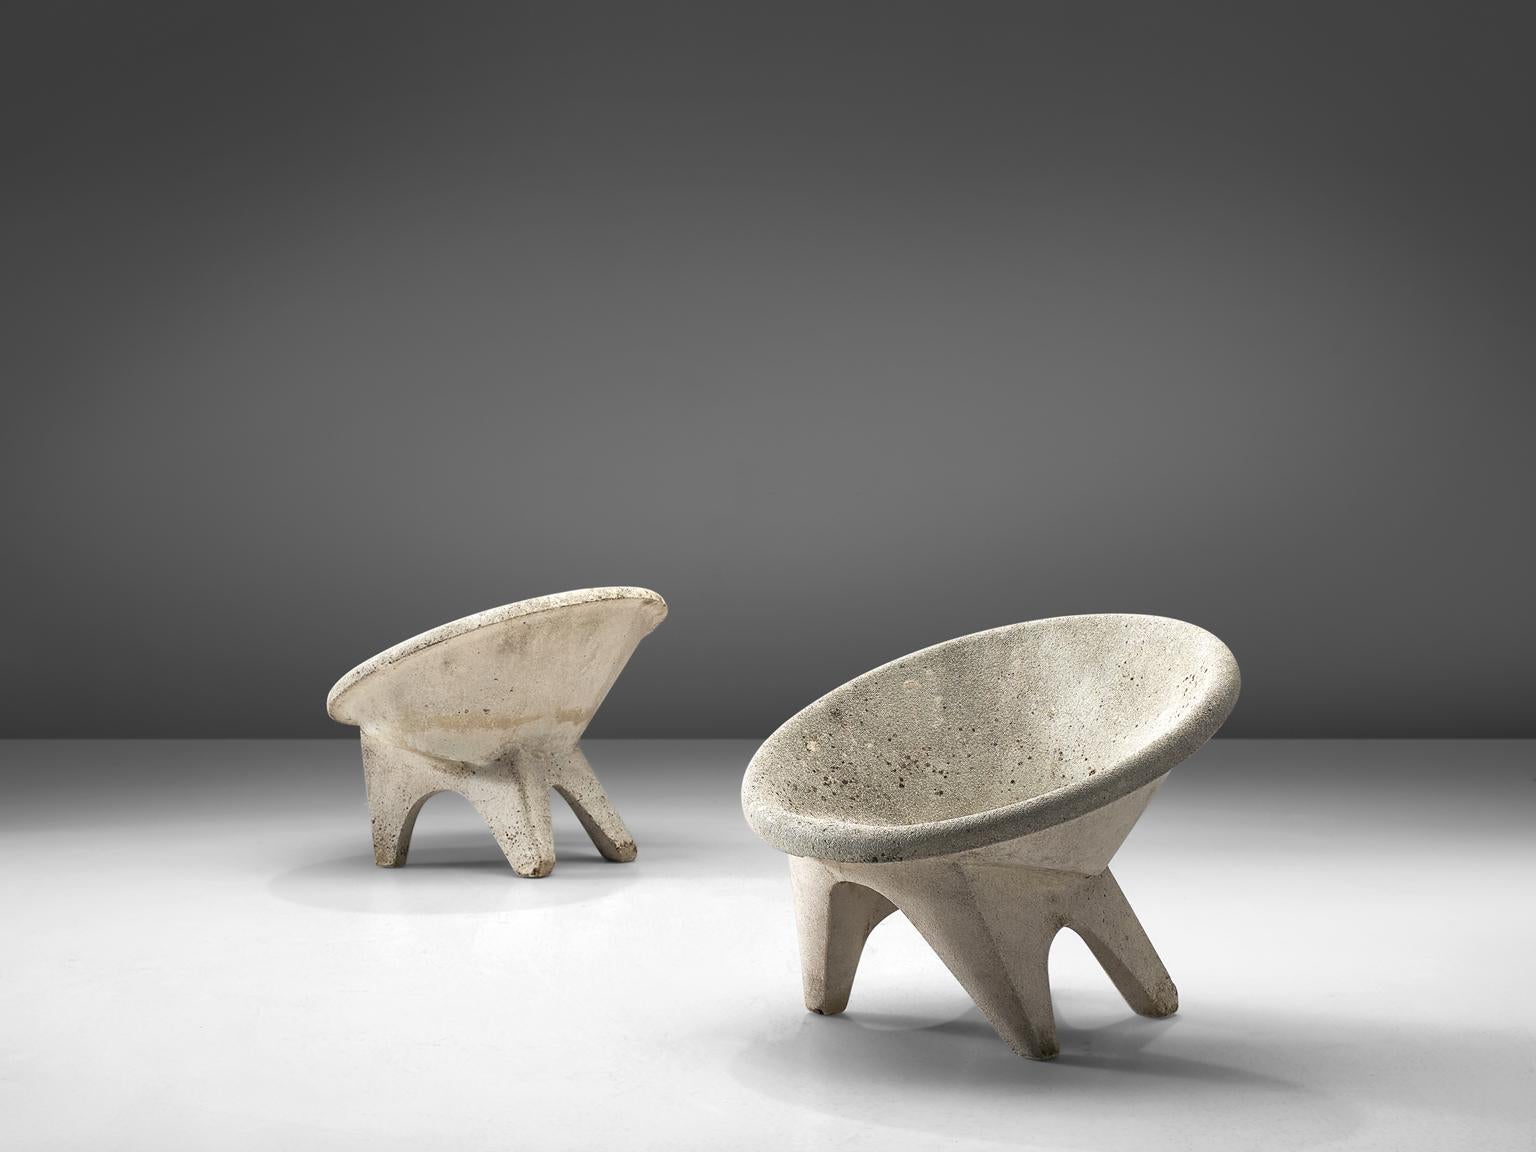 Set of 2 outdoor chairs, concrete, Europe, 1970s.

These characteristic lounge chairs are completely made of concrete, which make them perfect for outdoor use. The chairs feature a round shell that function as the seat. The bulky legs are slightly